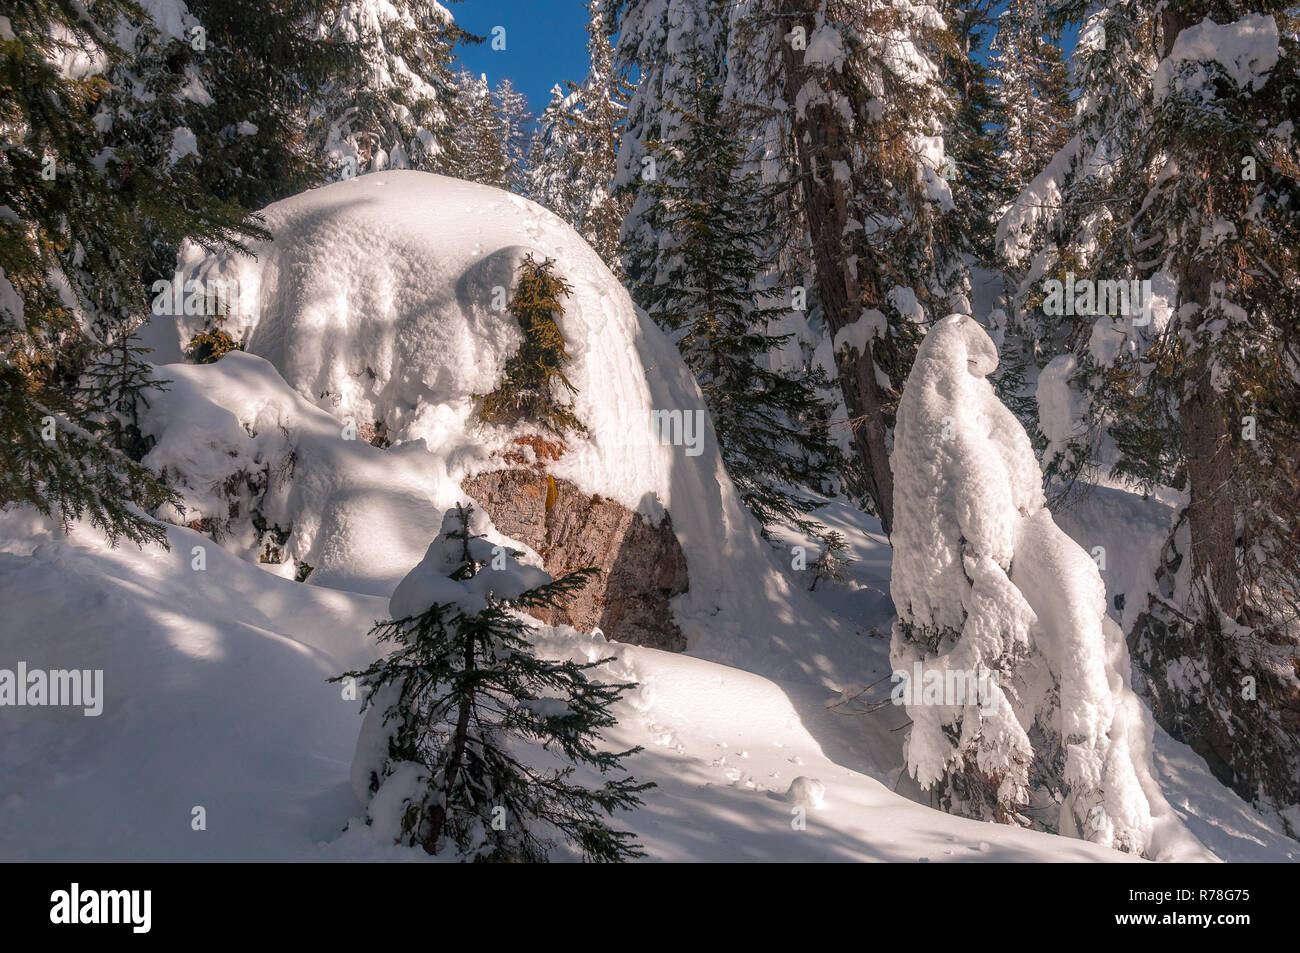 Fir forest covered with large piles of snow Stock Photo